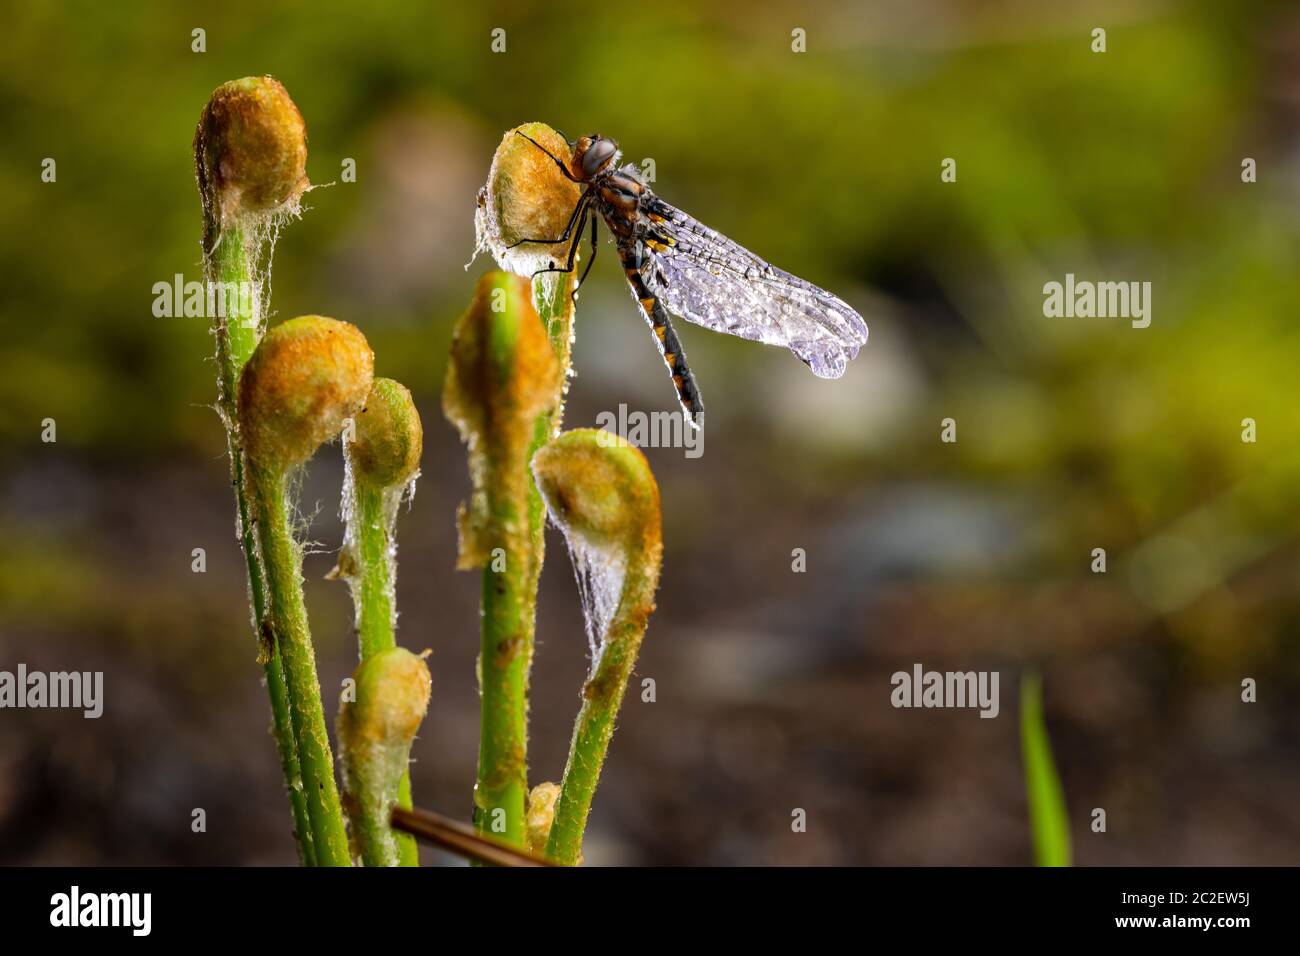 A Dragonfly in the early Morning Stock Photo